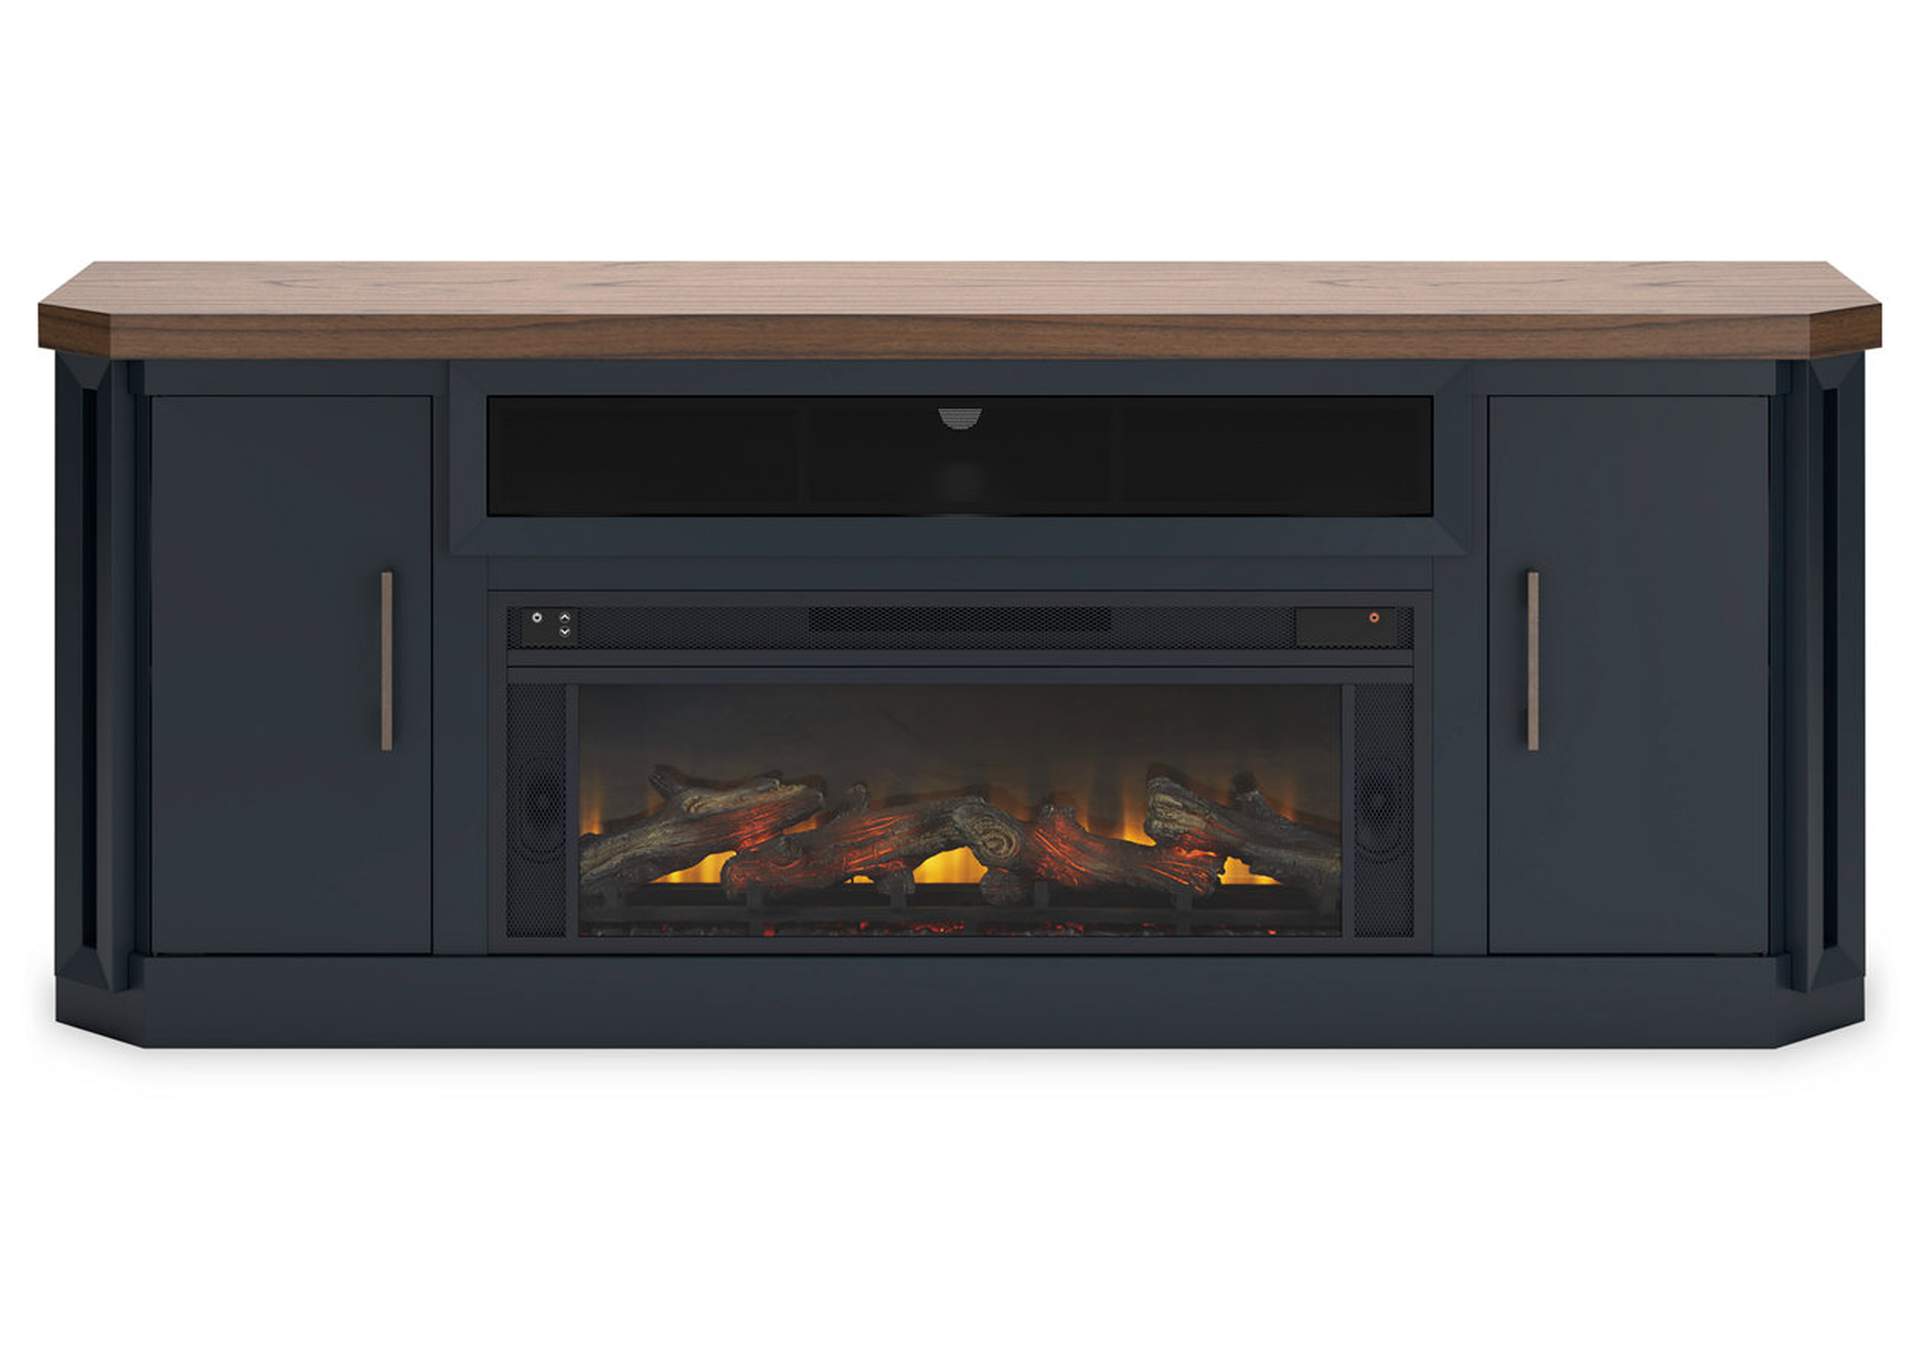 Landocken 83" TV Stand with Electric Fireplace,Signature Design By Ashley